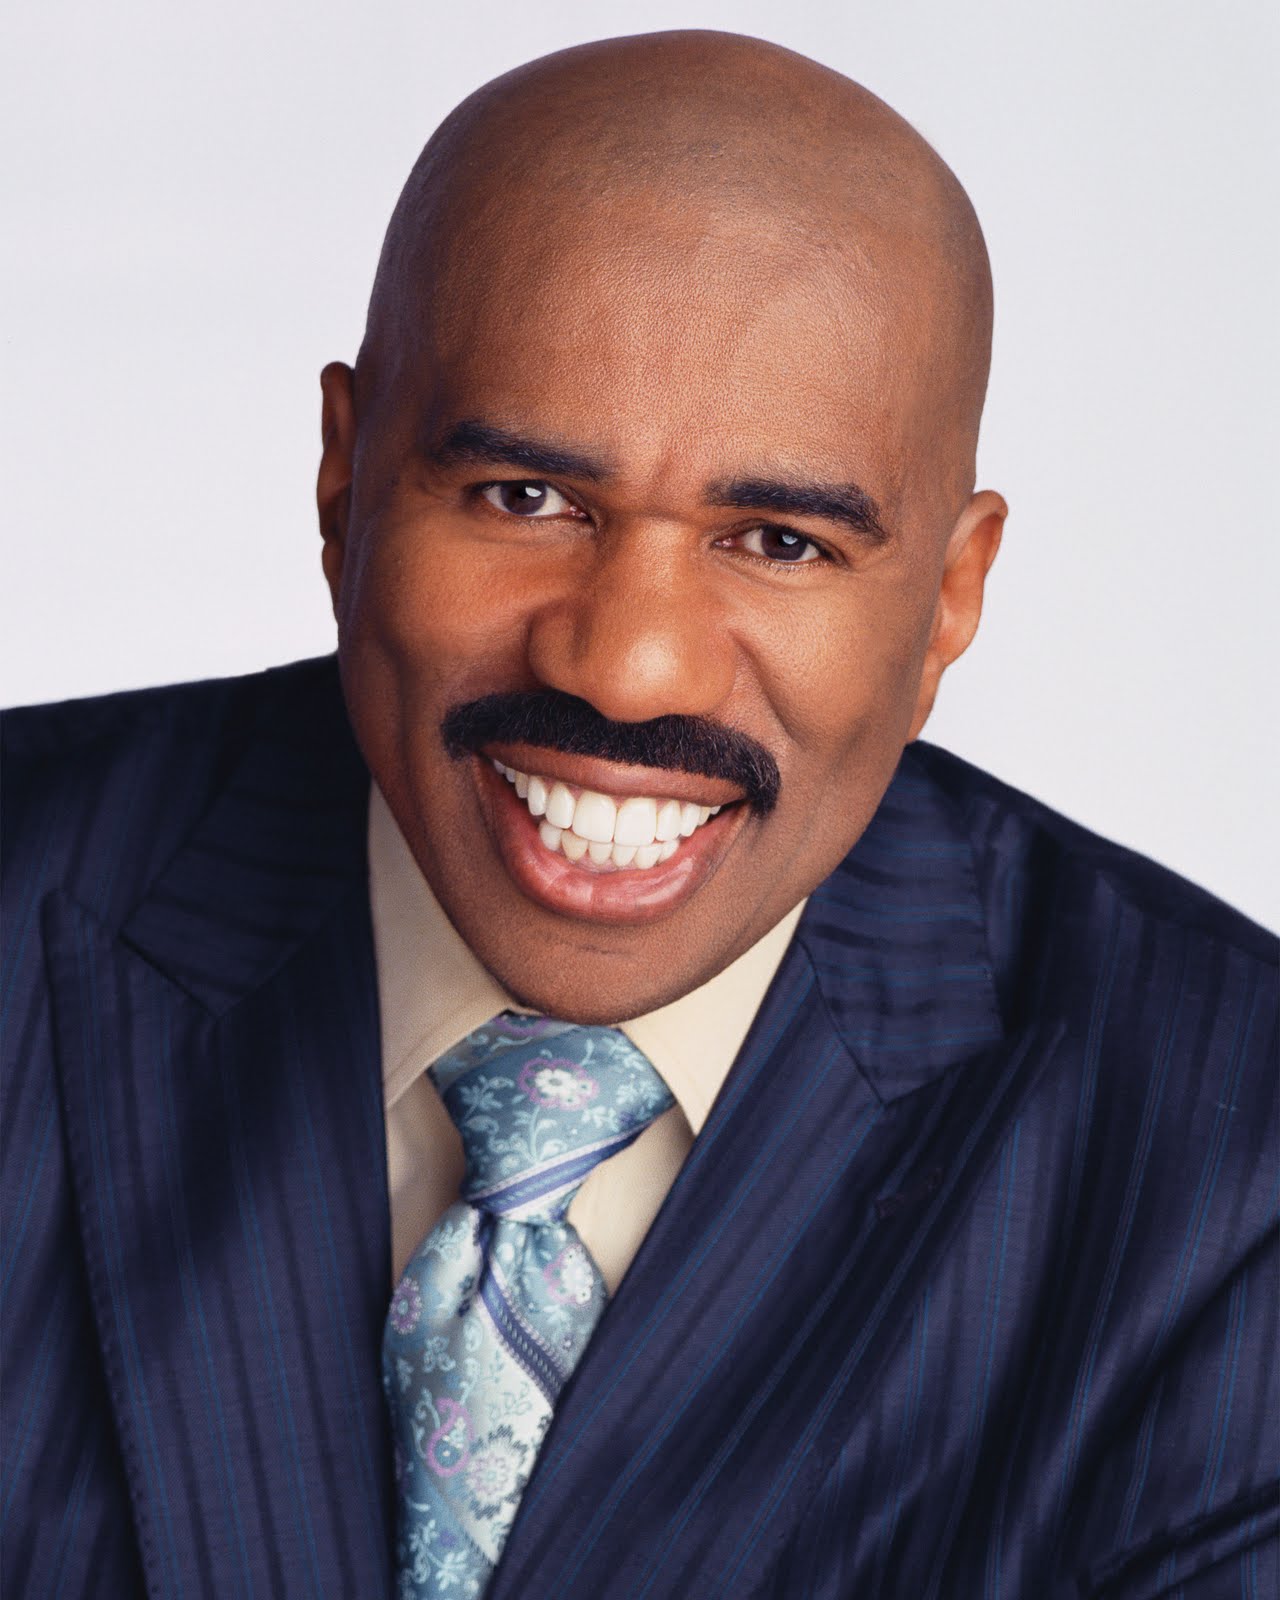 Steve Harvey Talks Relationships in Vancouver, London, and Toronto